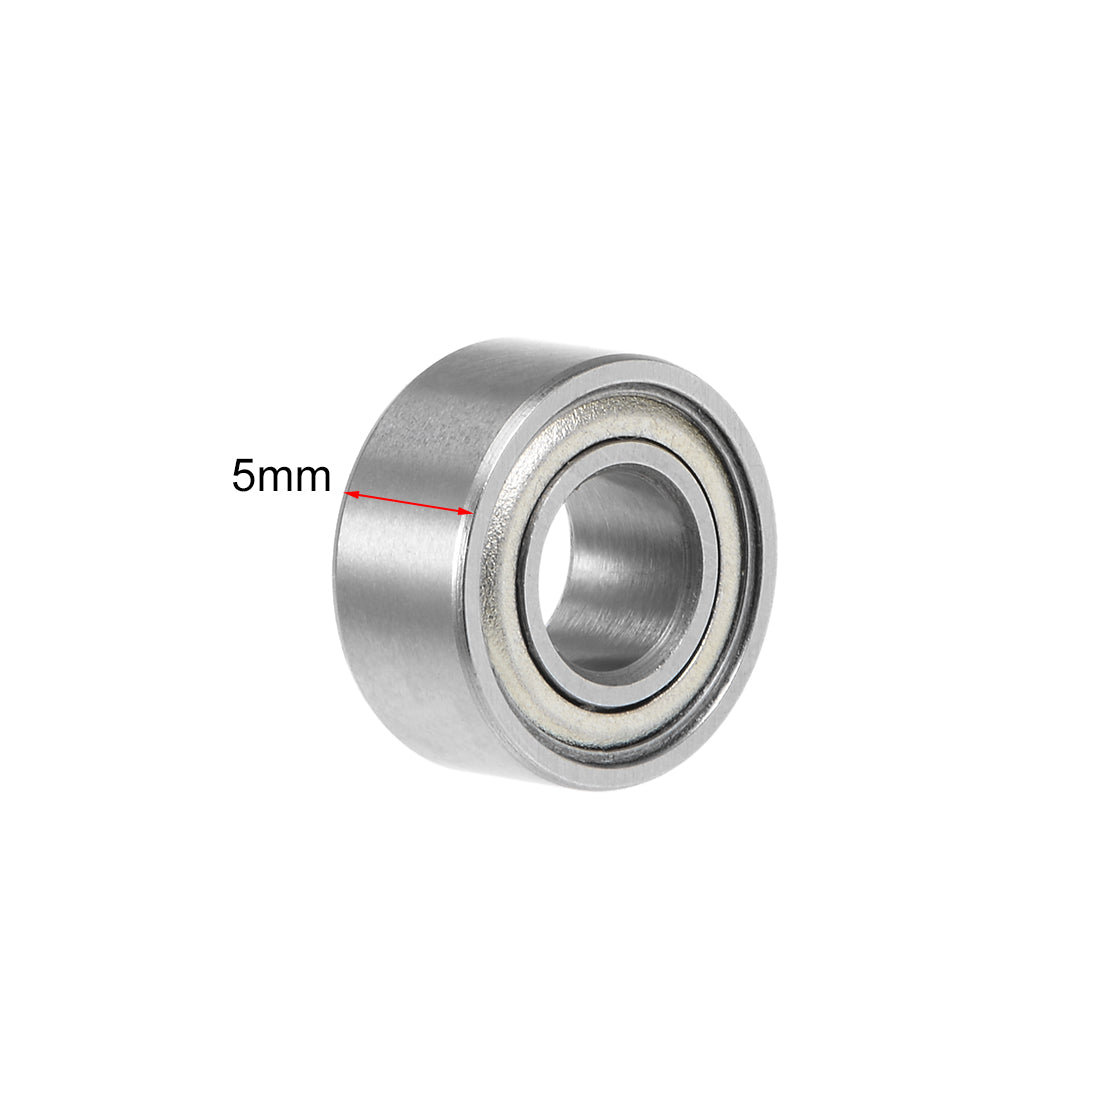 uxcell Uxcell Deep Groove Ball Bearings Metric Double Shielded Chrome Steel P0 Z1 Bearing